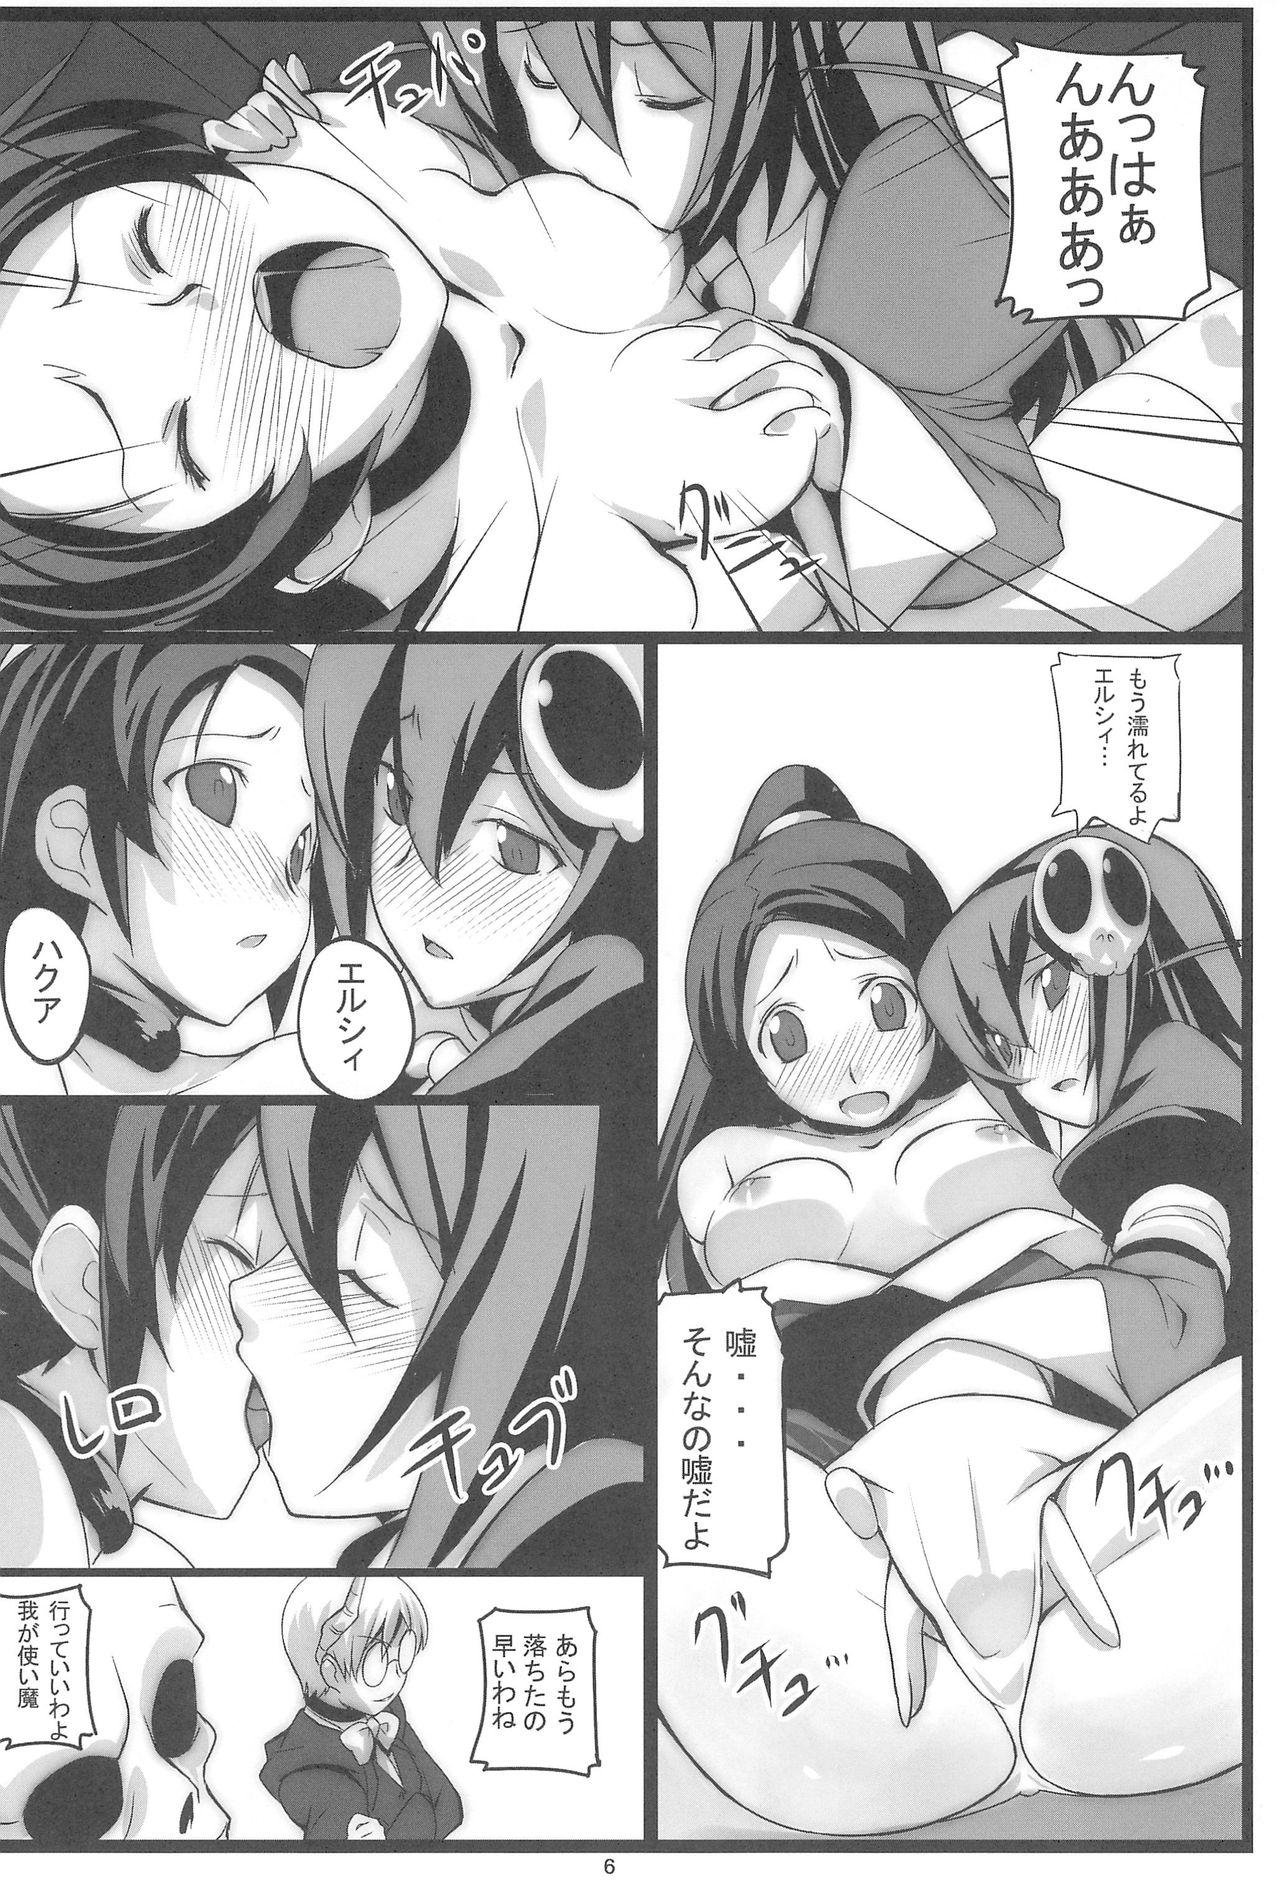 Sislovesme SWEET TRAP TWIN - The world god only knows Culo Grande - Page 10